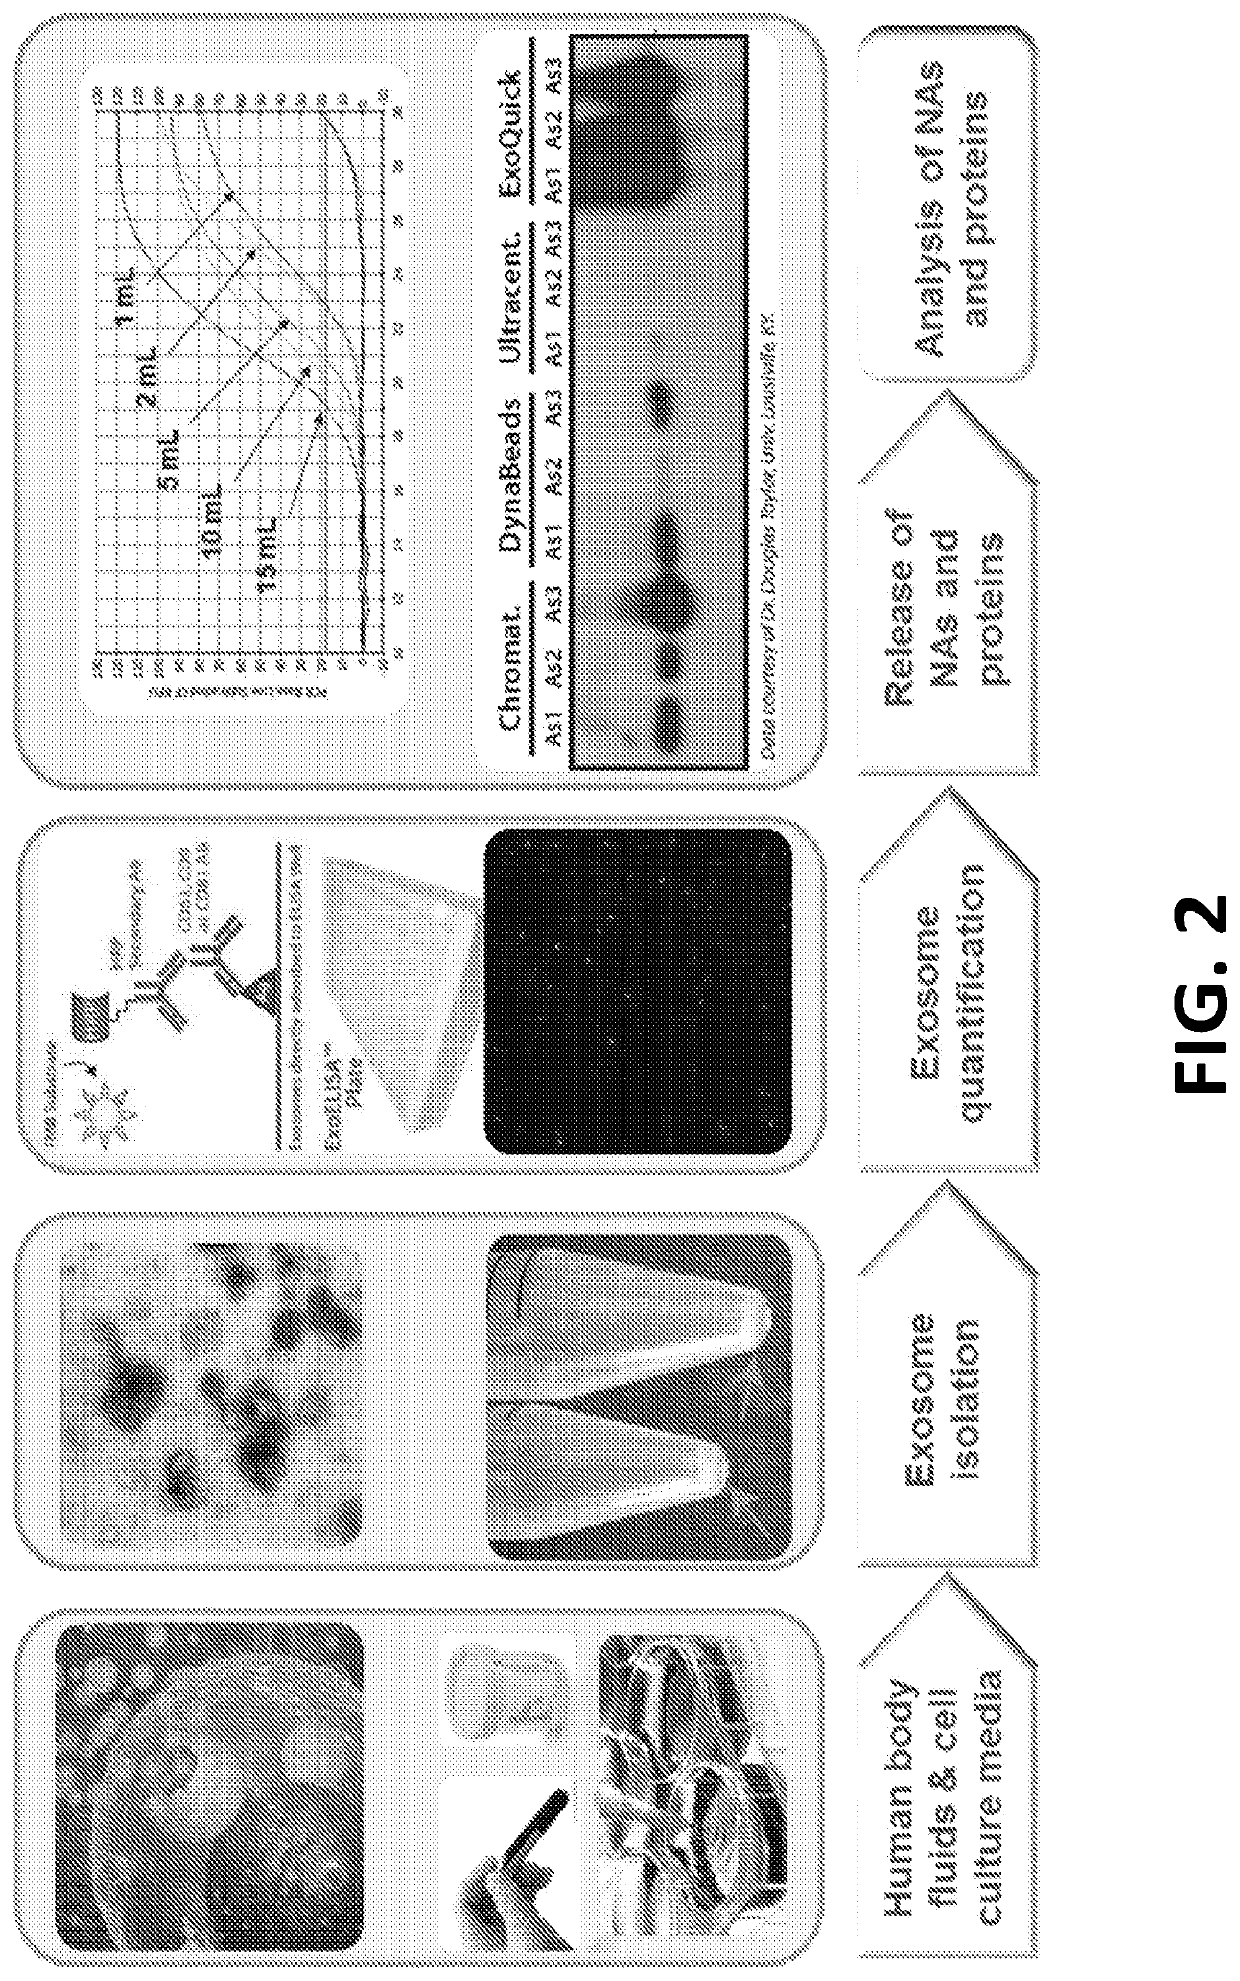 Exosome-Total-Isolation-Chip (ExoTIC) device for isolation of exosome-based biomarkers